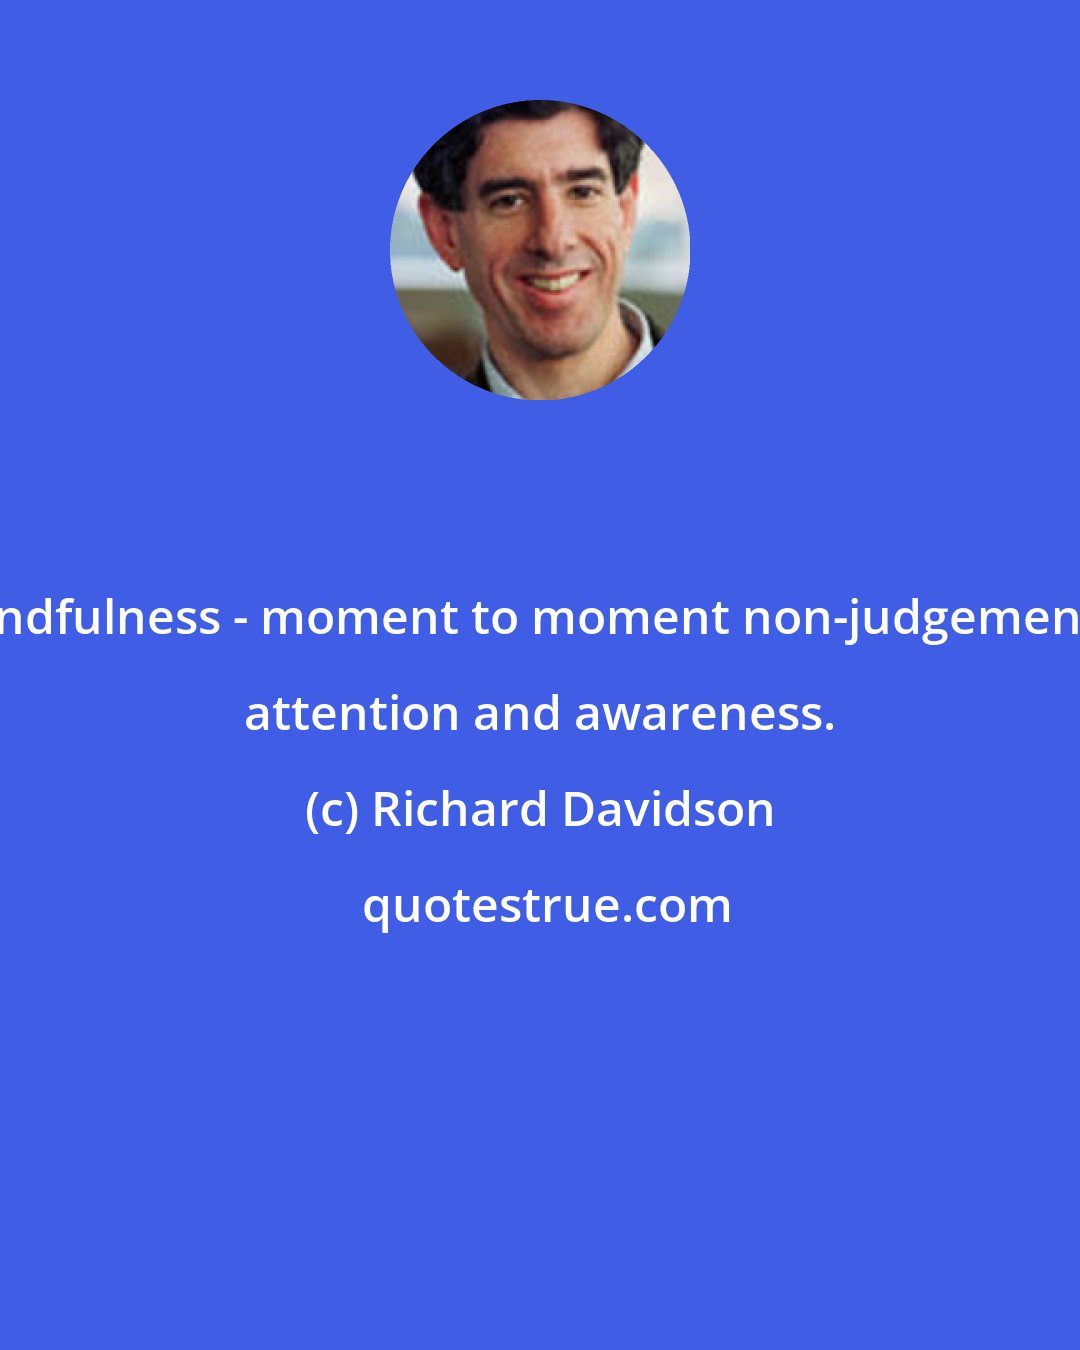 Richard Davidson: Mindfulness - moment to moment non-judgemental attention and awareness.